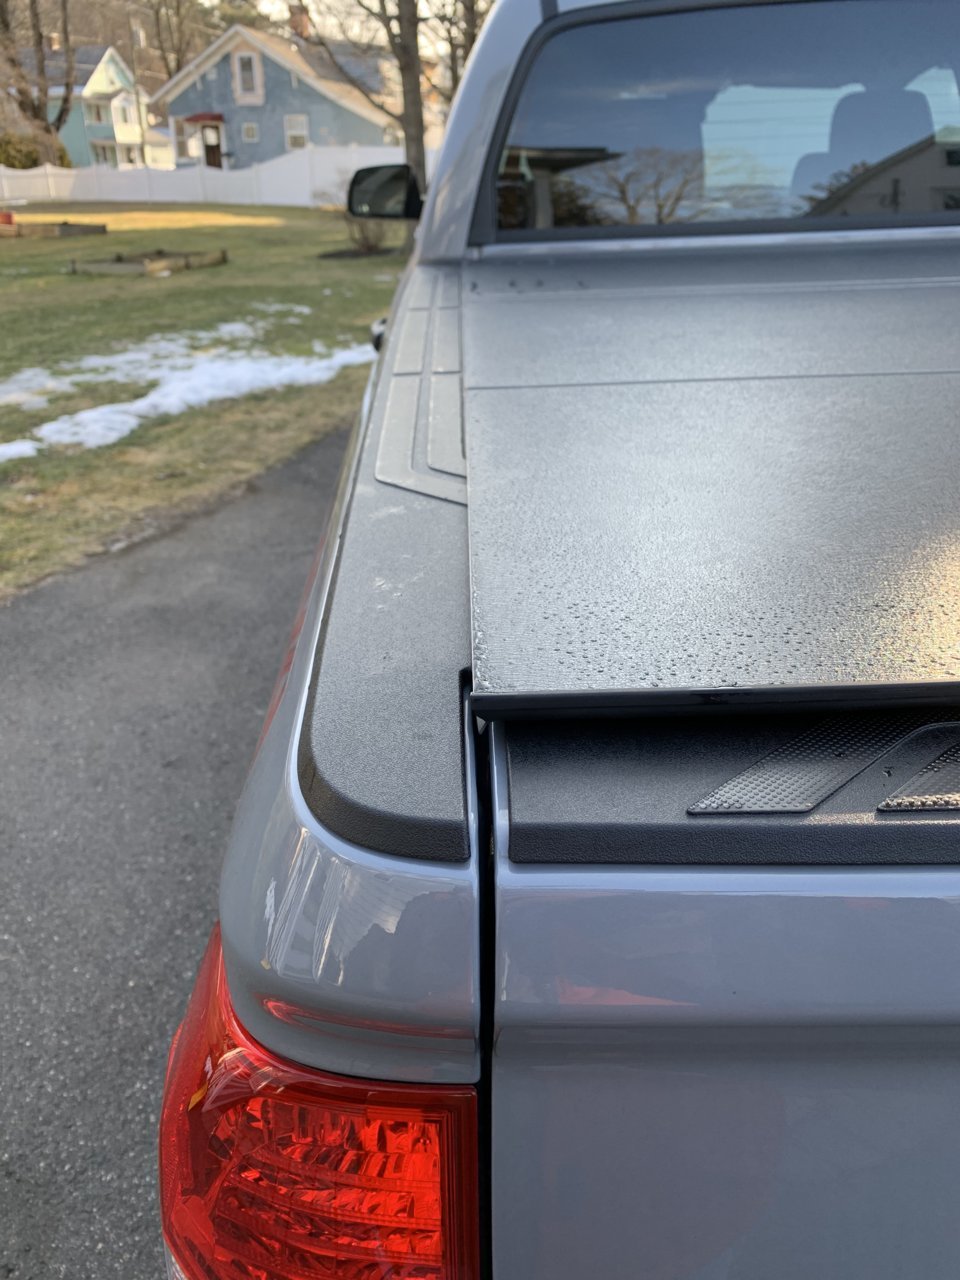 Show your Tonneau cover | Page 9 | Toyota Tundra Forum